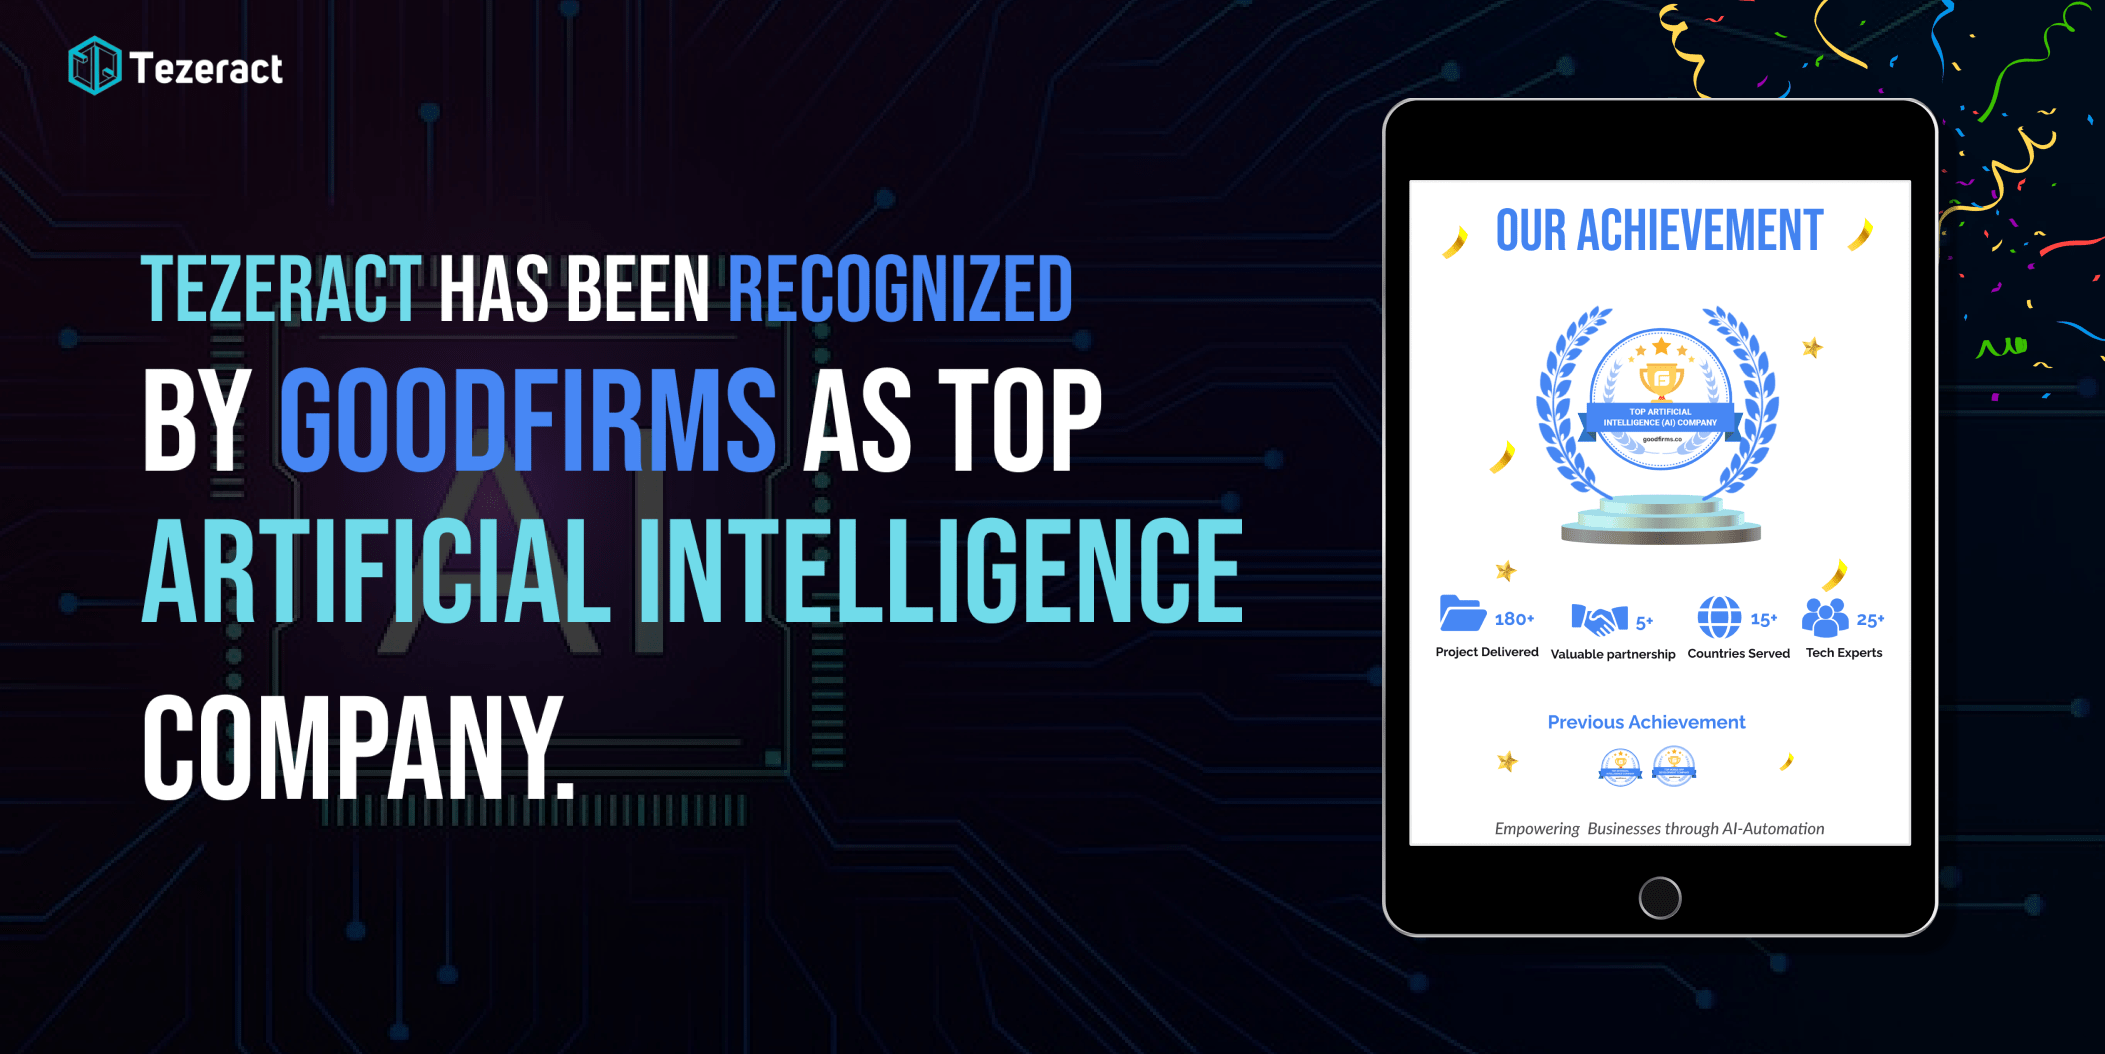 Top Artificial Intelligence Company